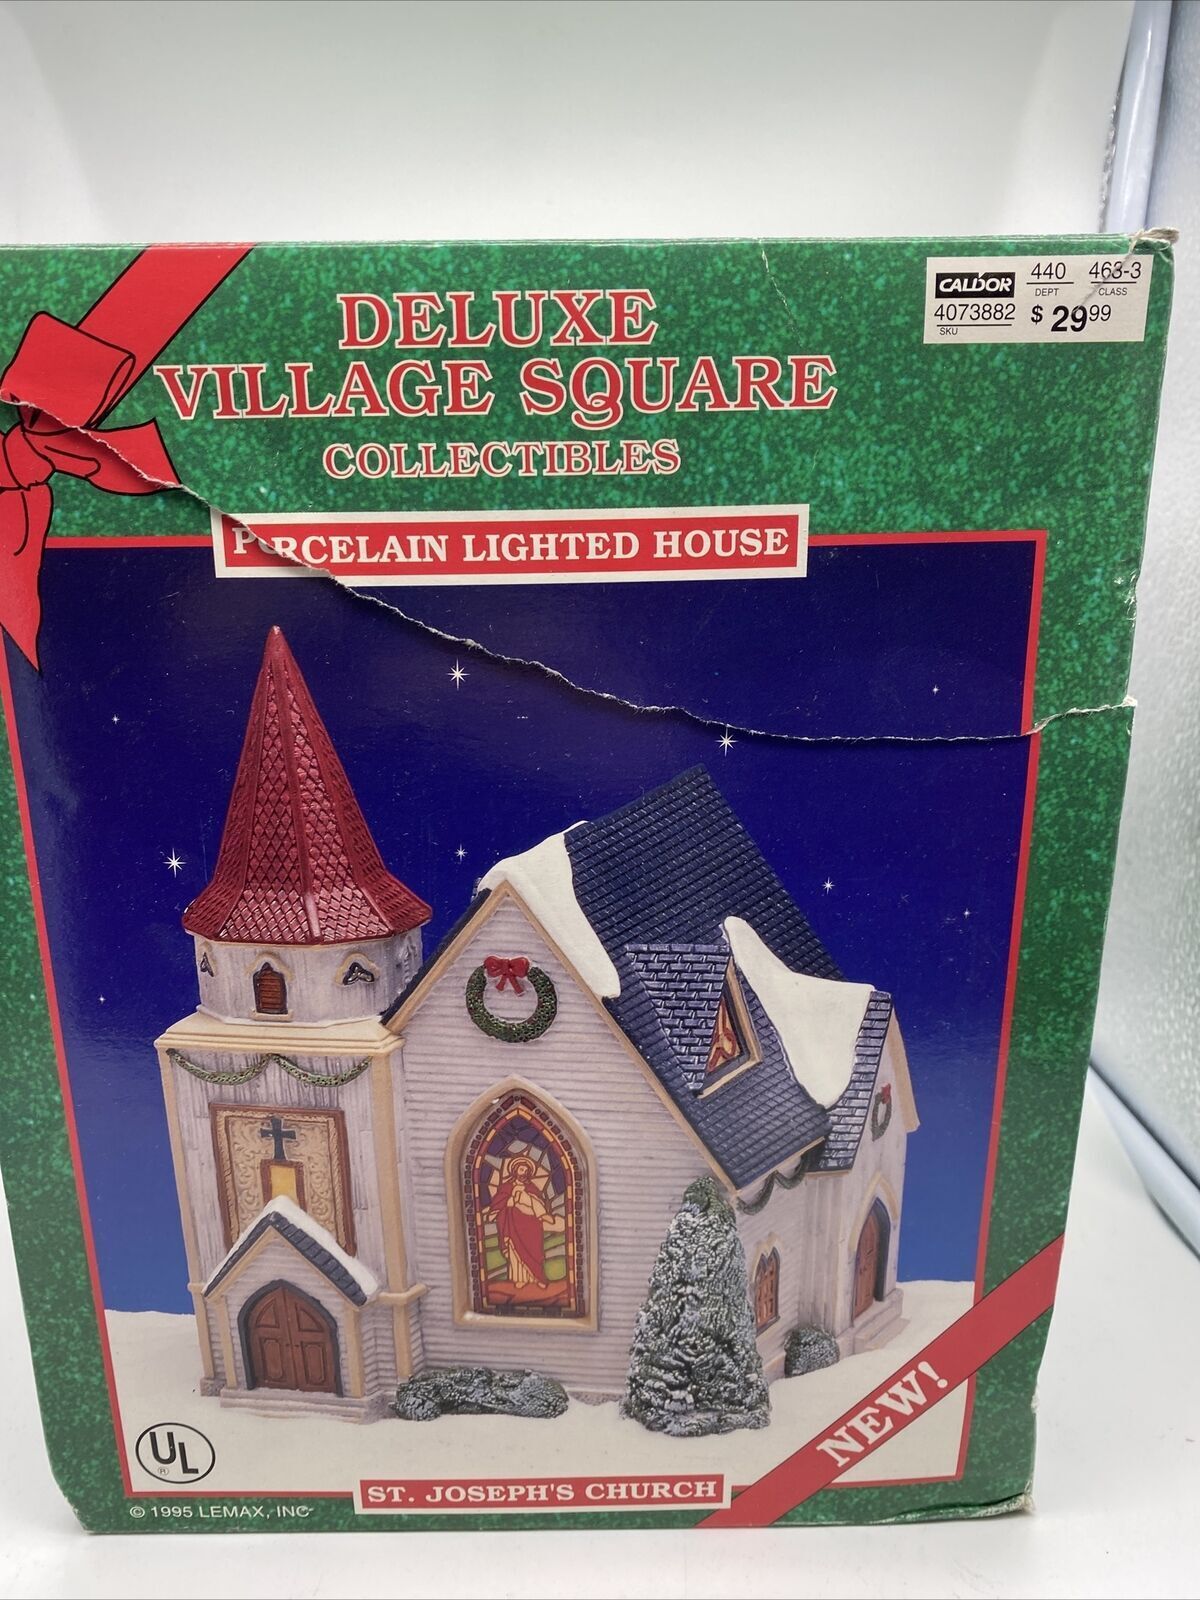 Deluxe Village Square Collectibles Porcelain Lighted House St.Joseph’s Church